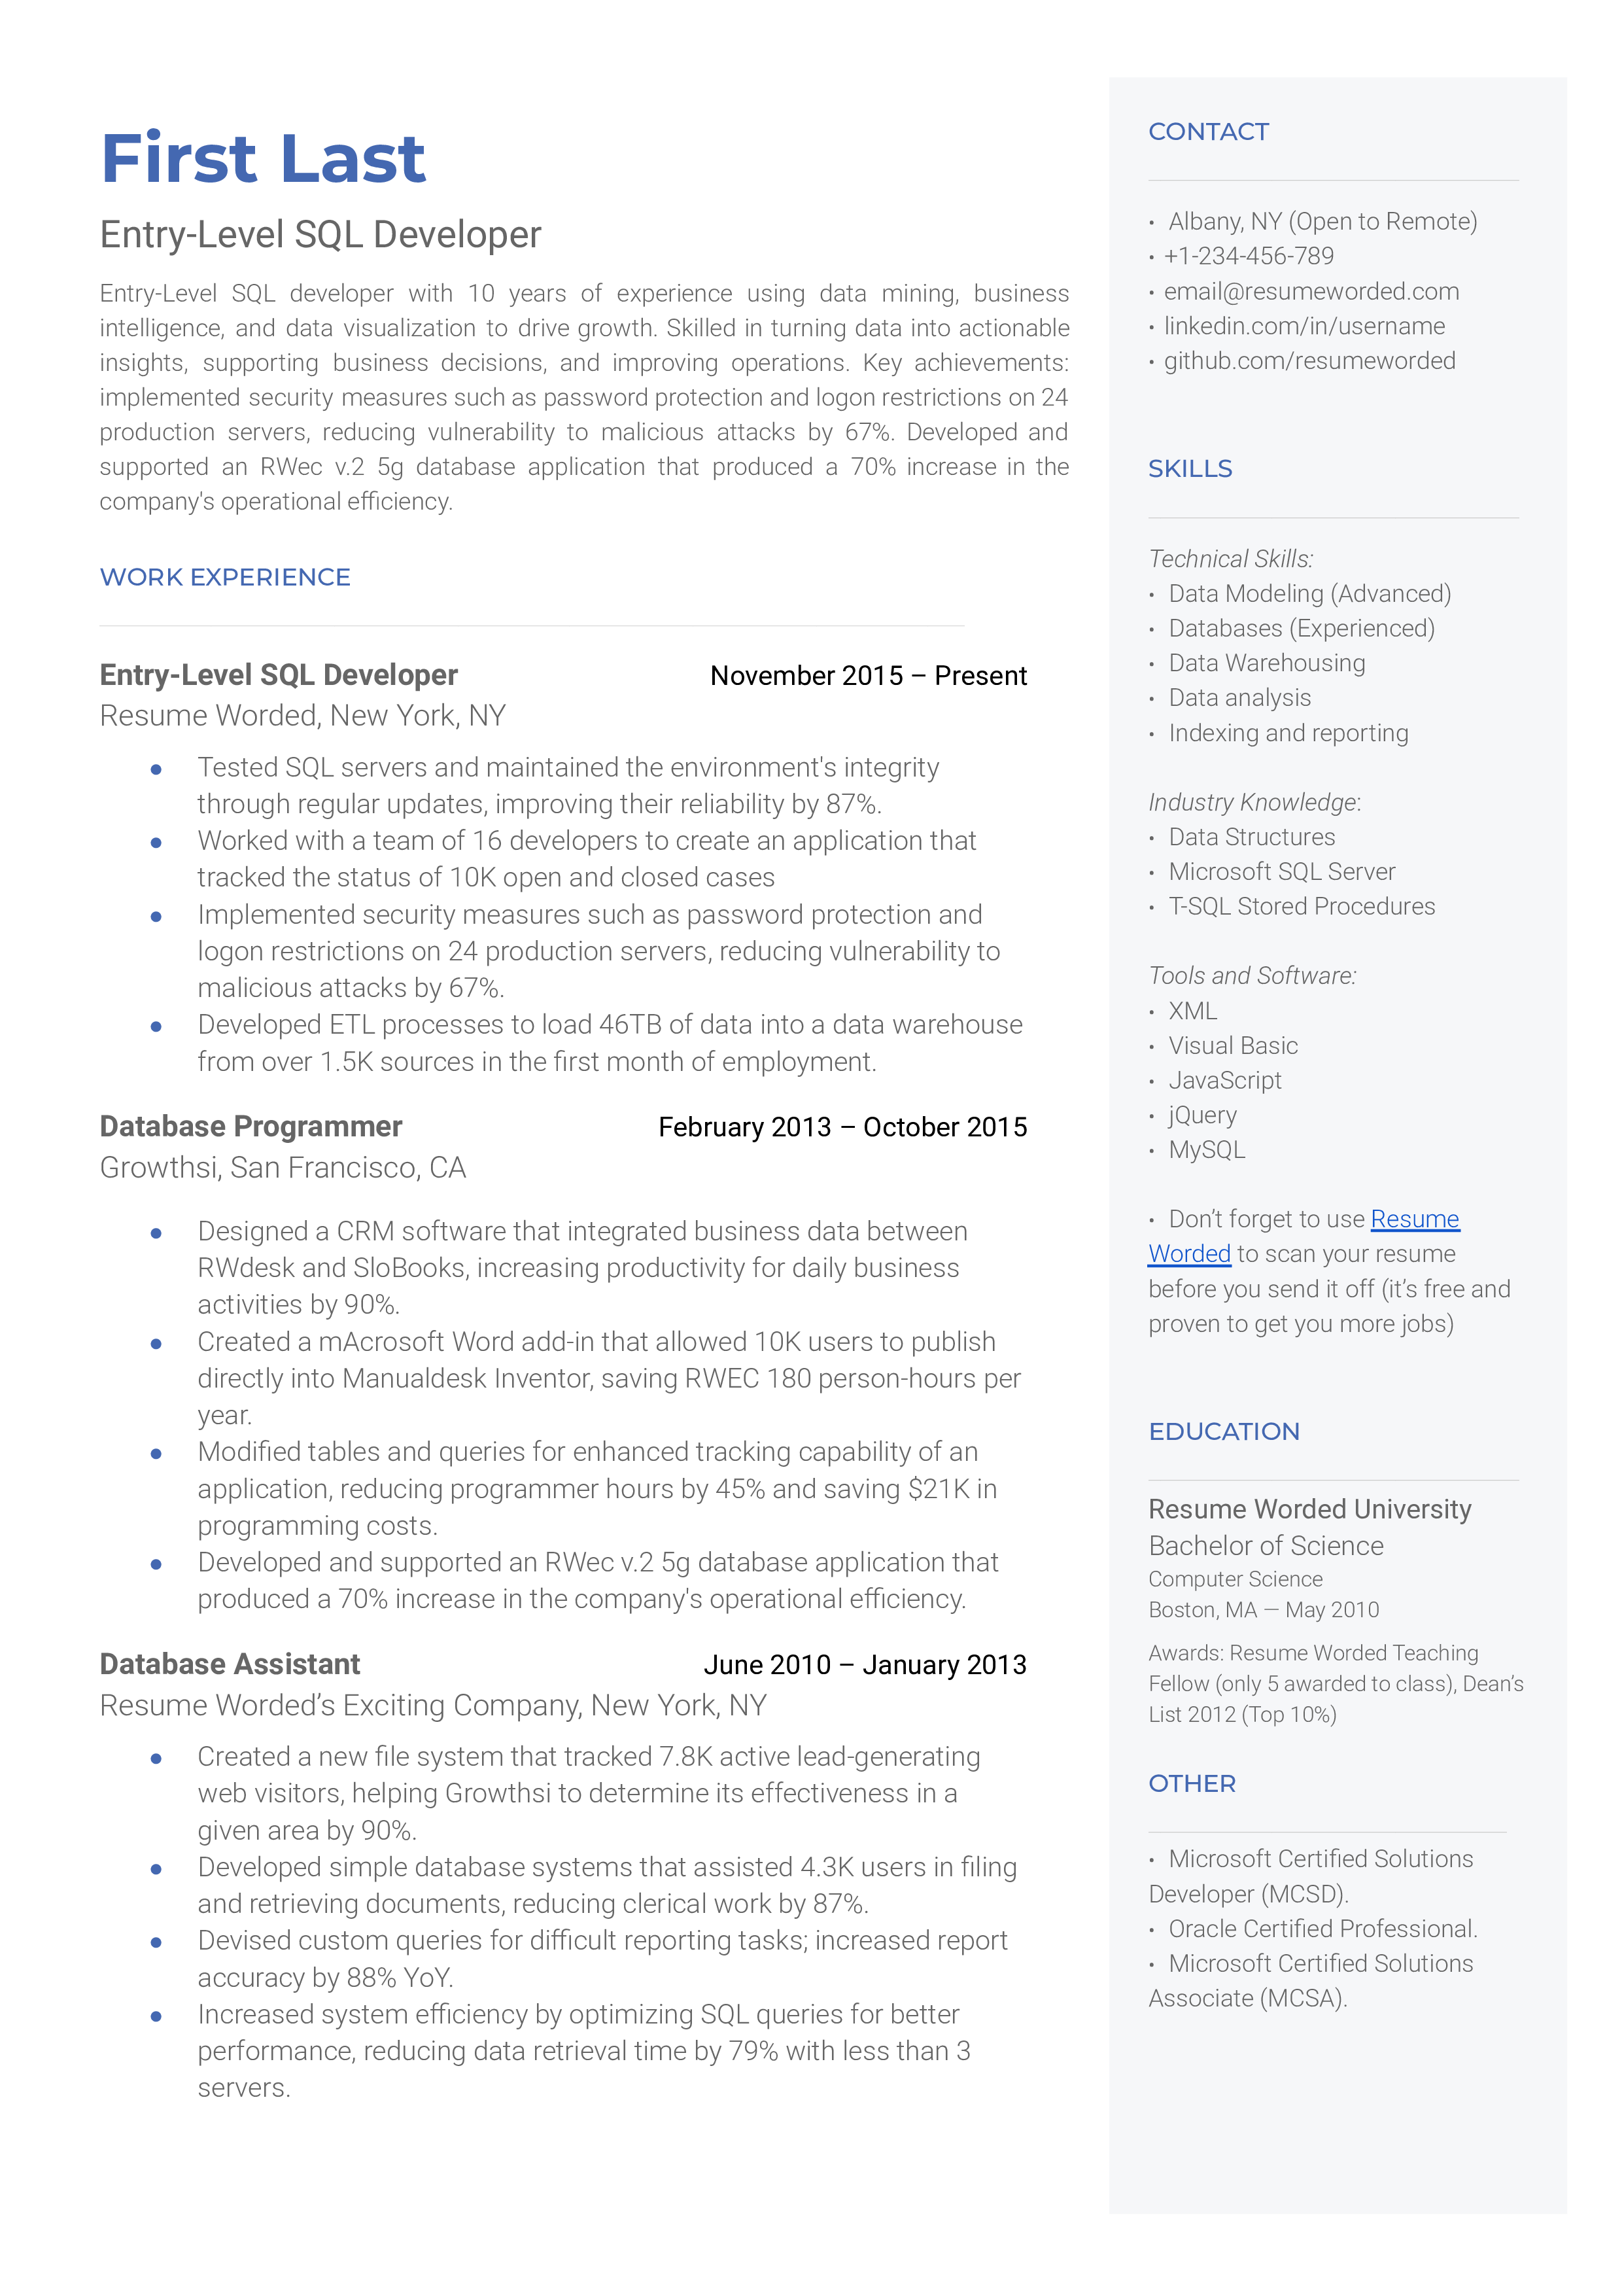 An entry-level SQL developer CV showcasing relevant coursework and SQL tools expertise.